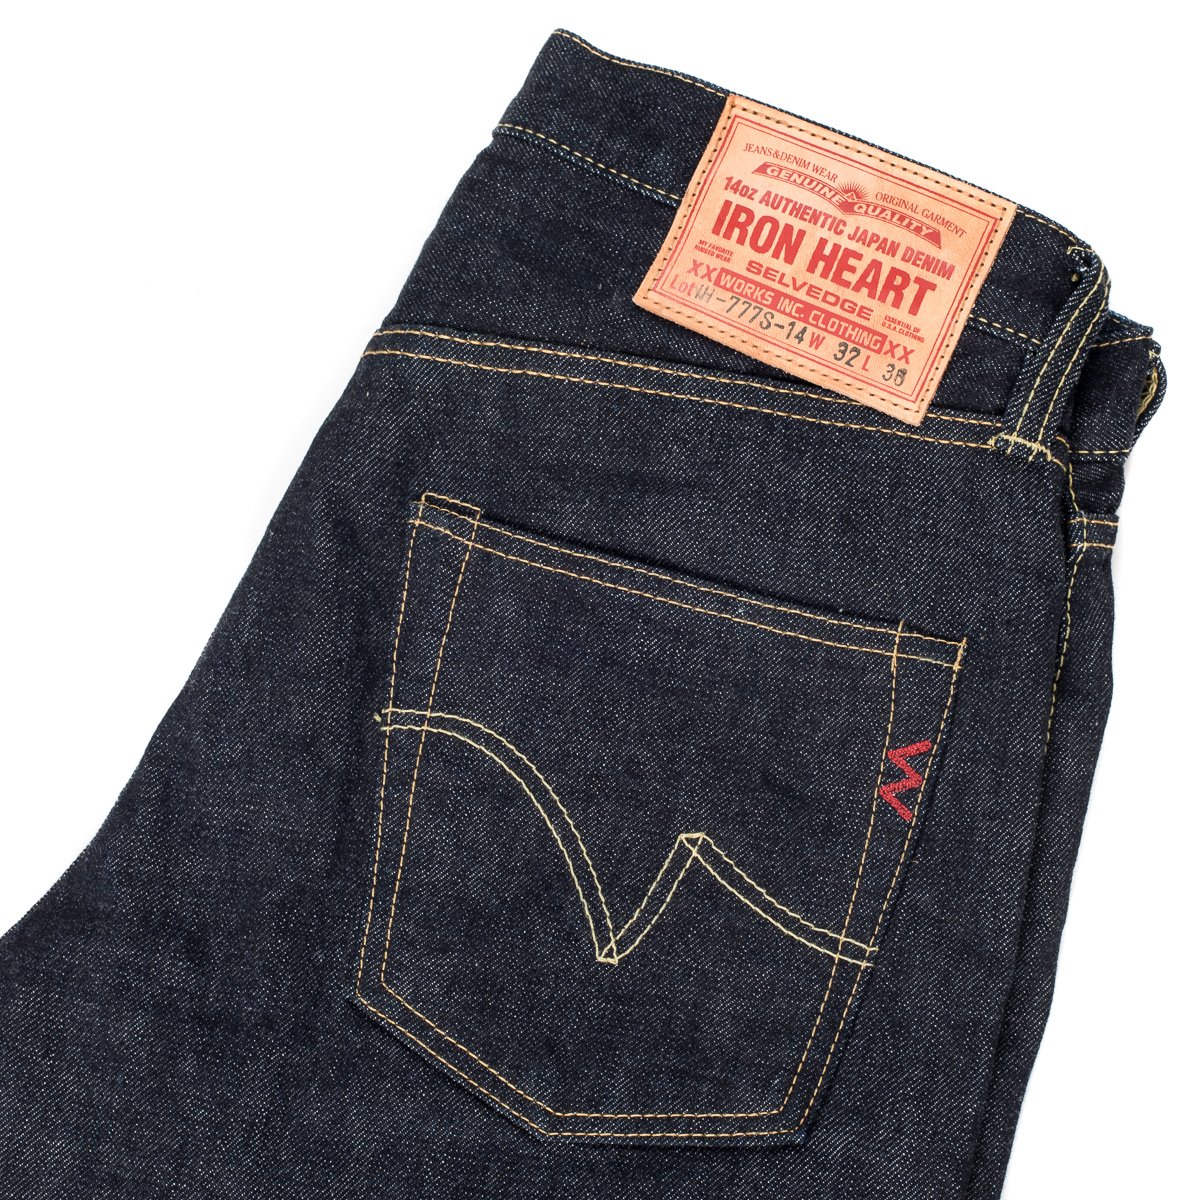 lucky brand jeans black friday deals